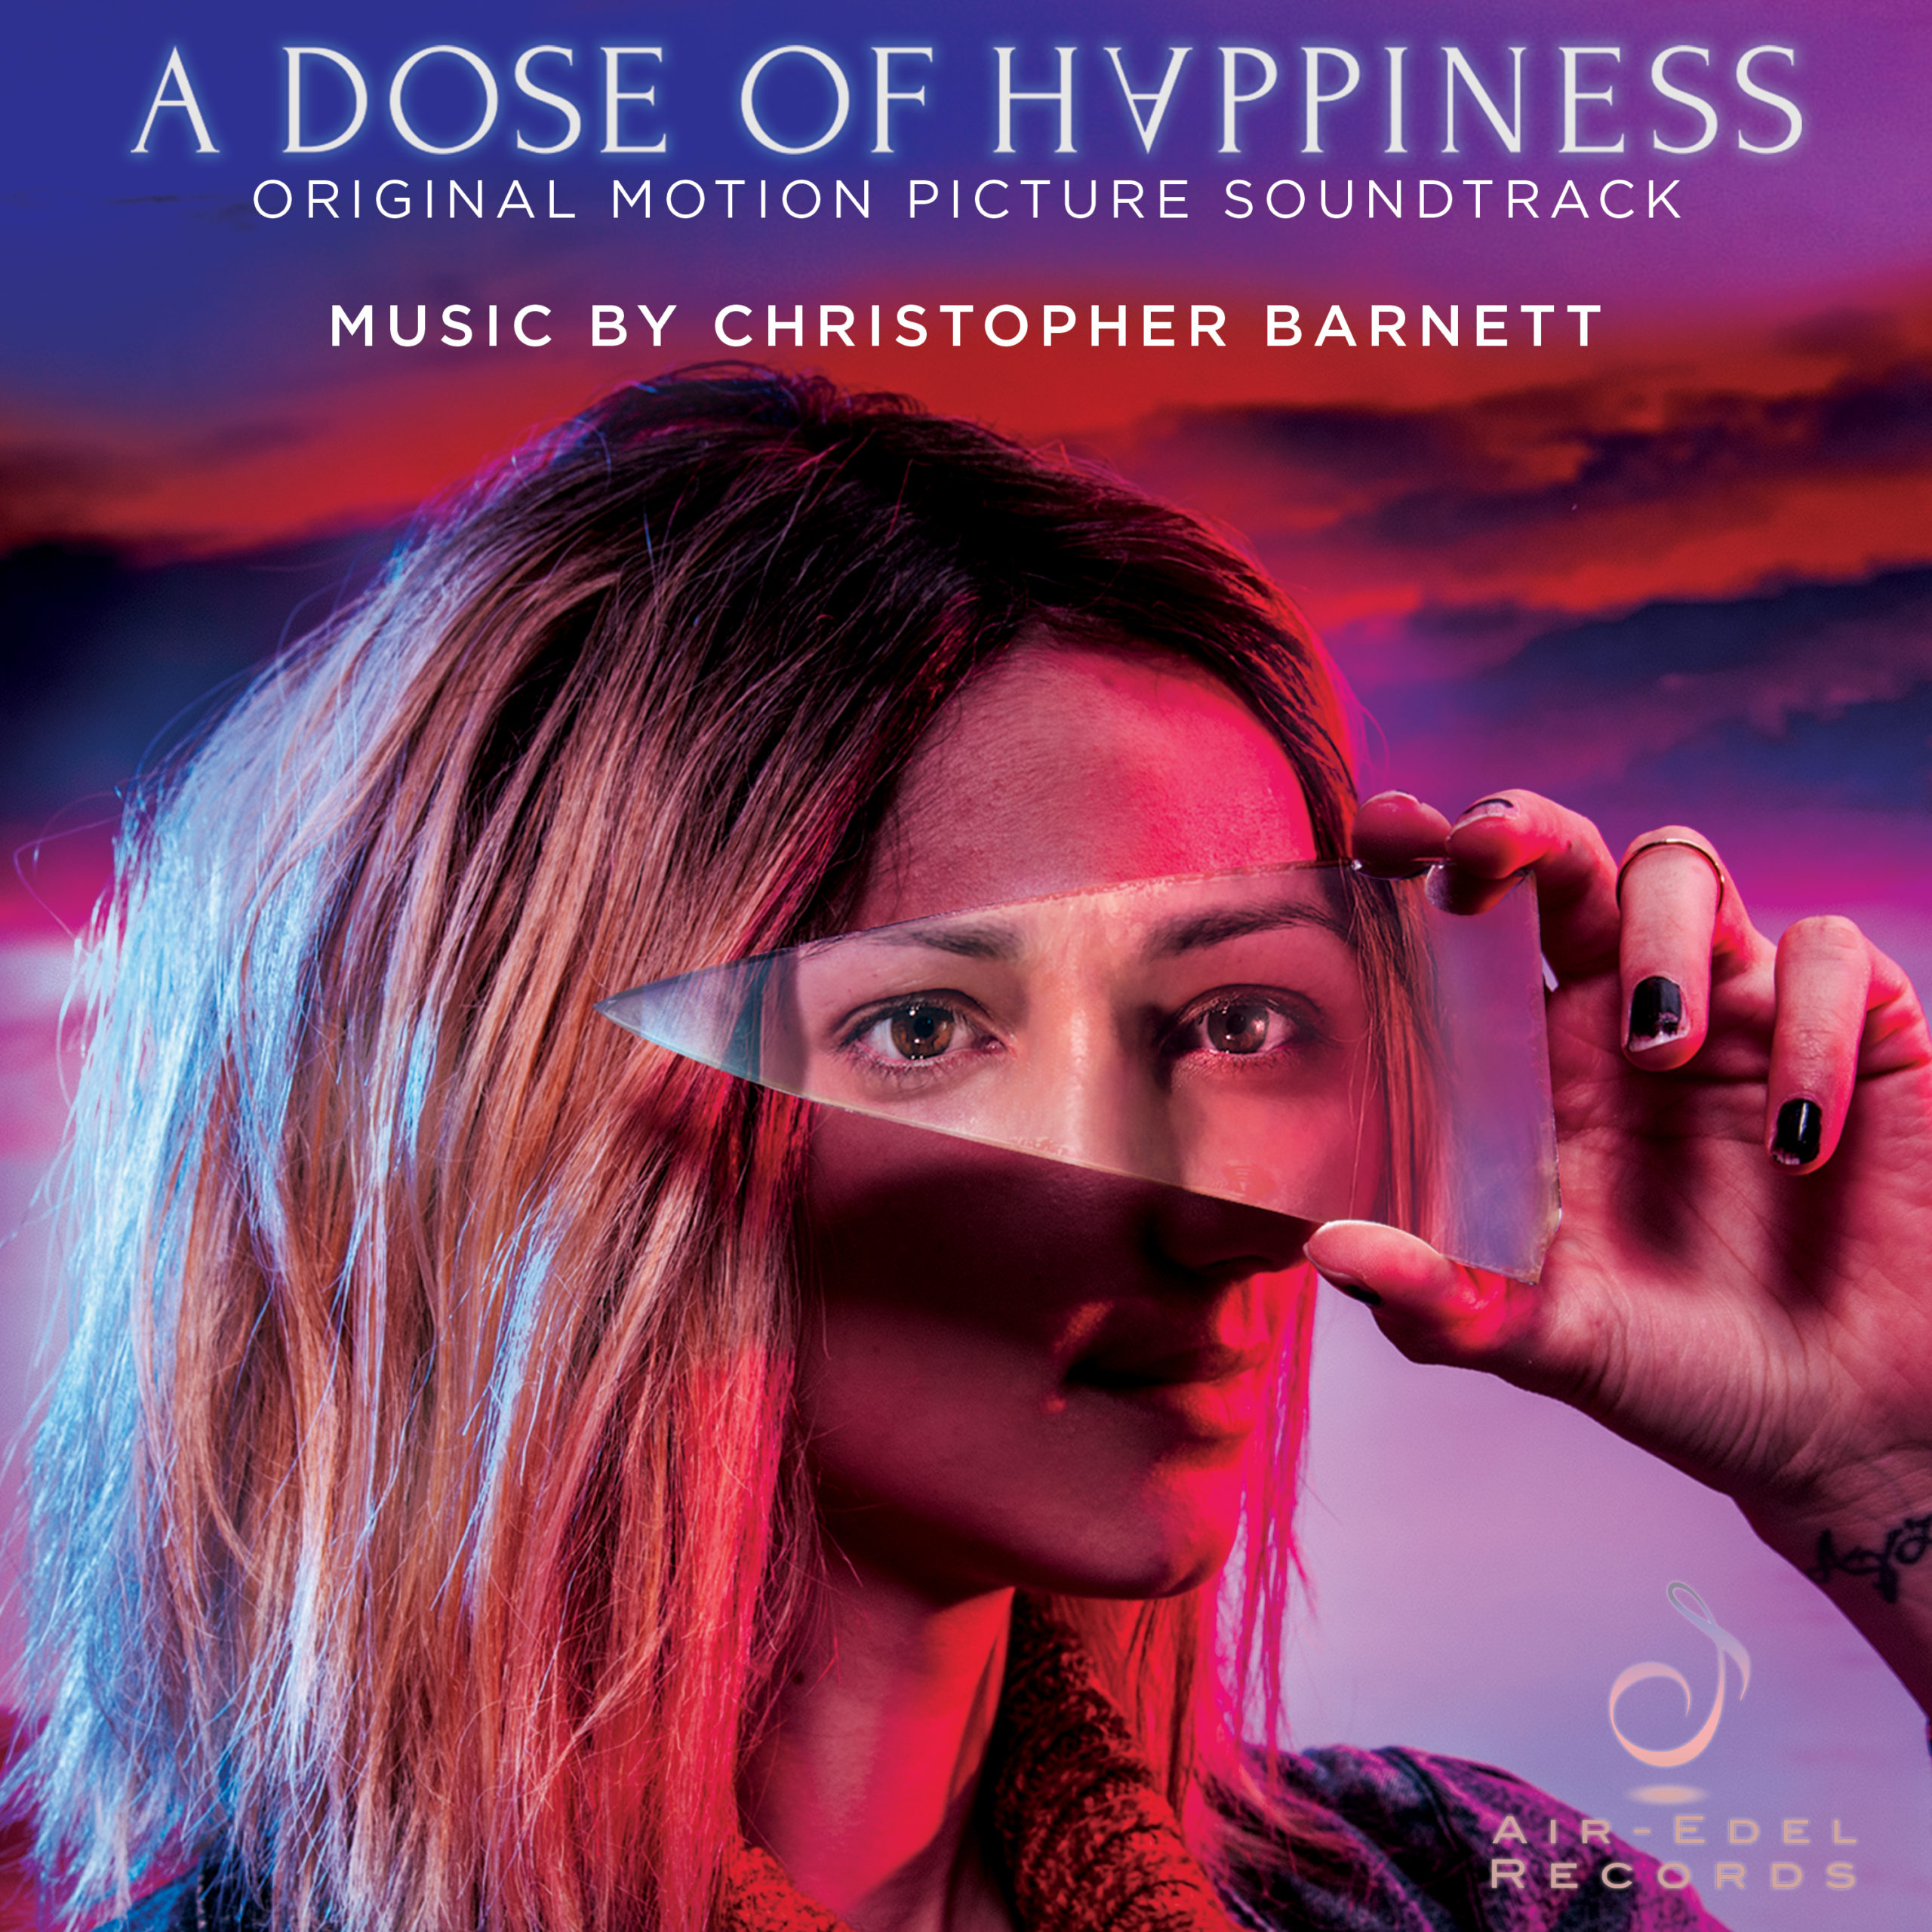 A Dose of Happiness (Original Motion Picture Soundtrack) - Air Edel